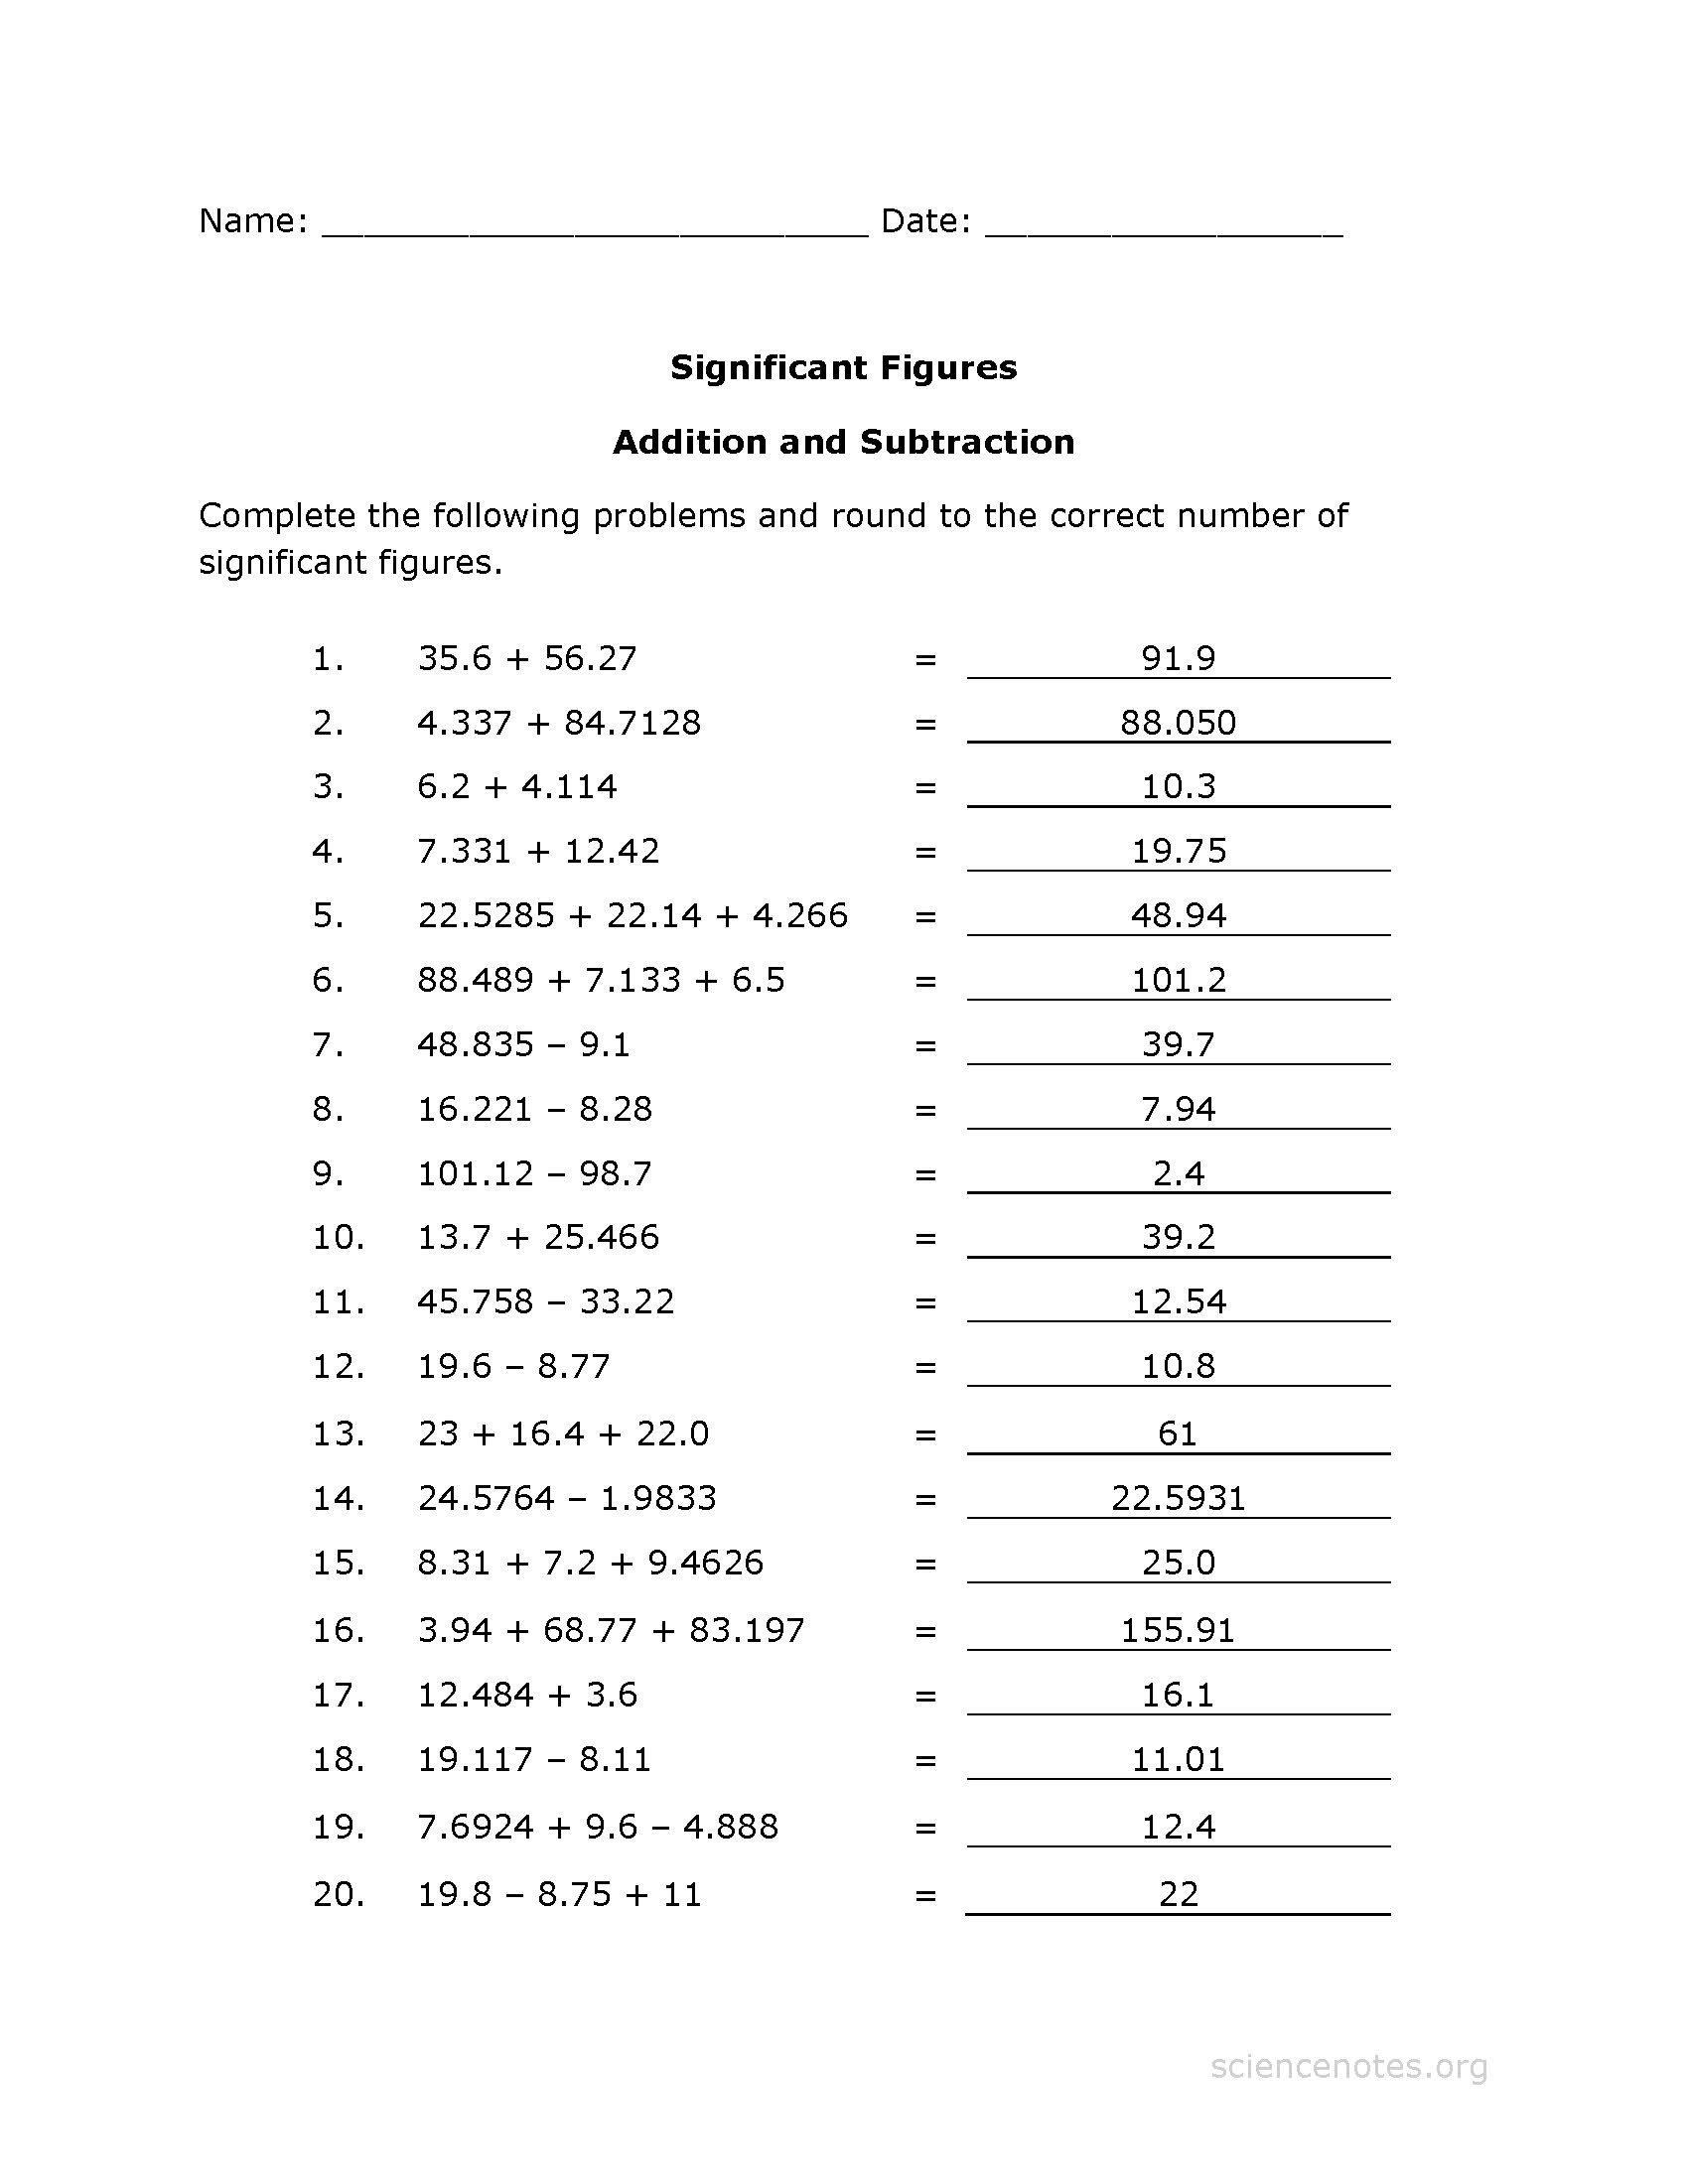 Significant Figures Worksheet and Answer Key Image